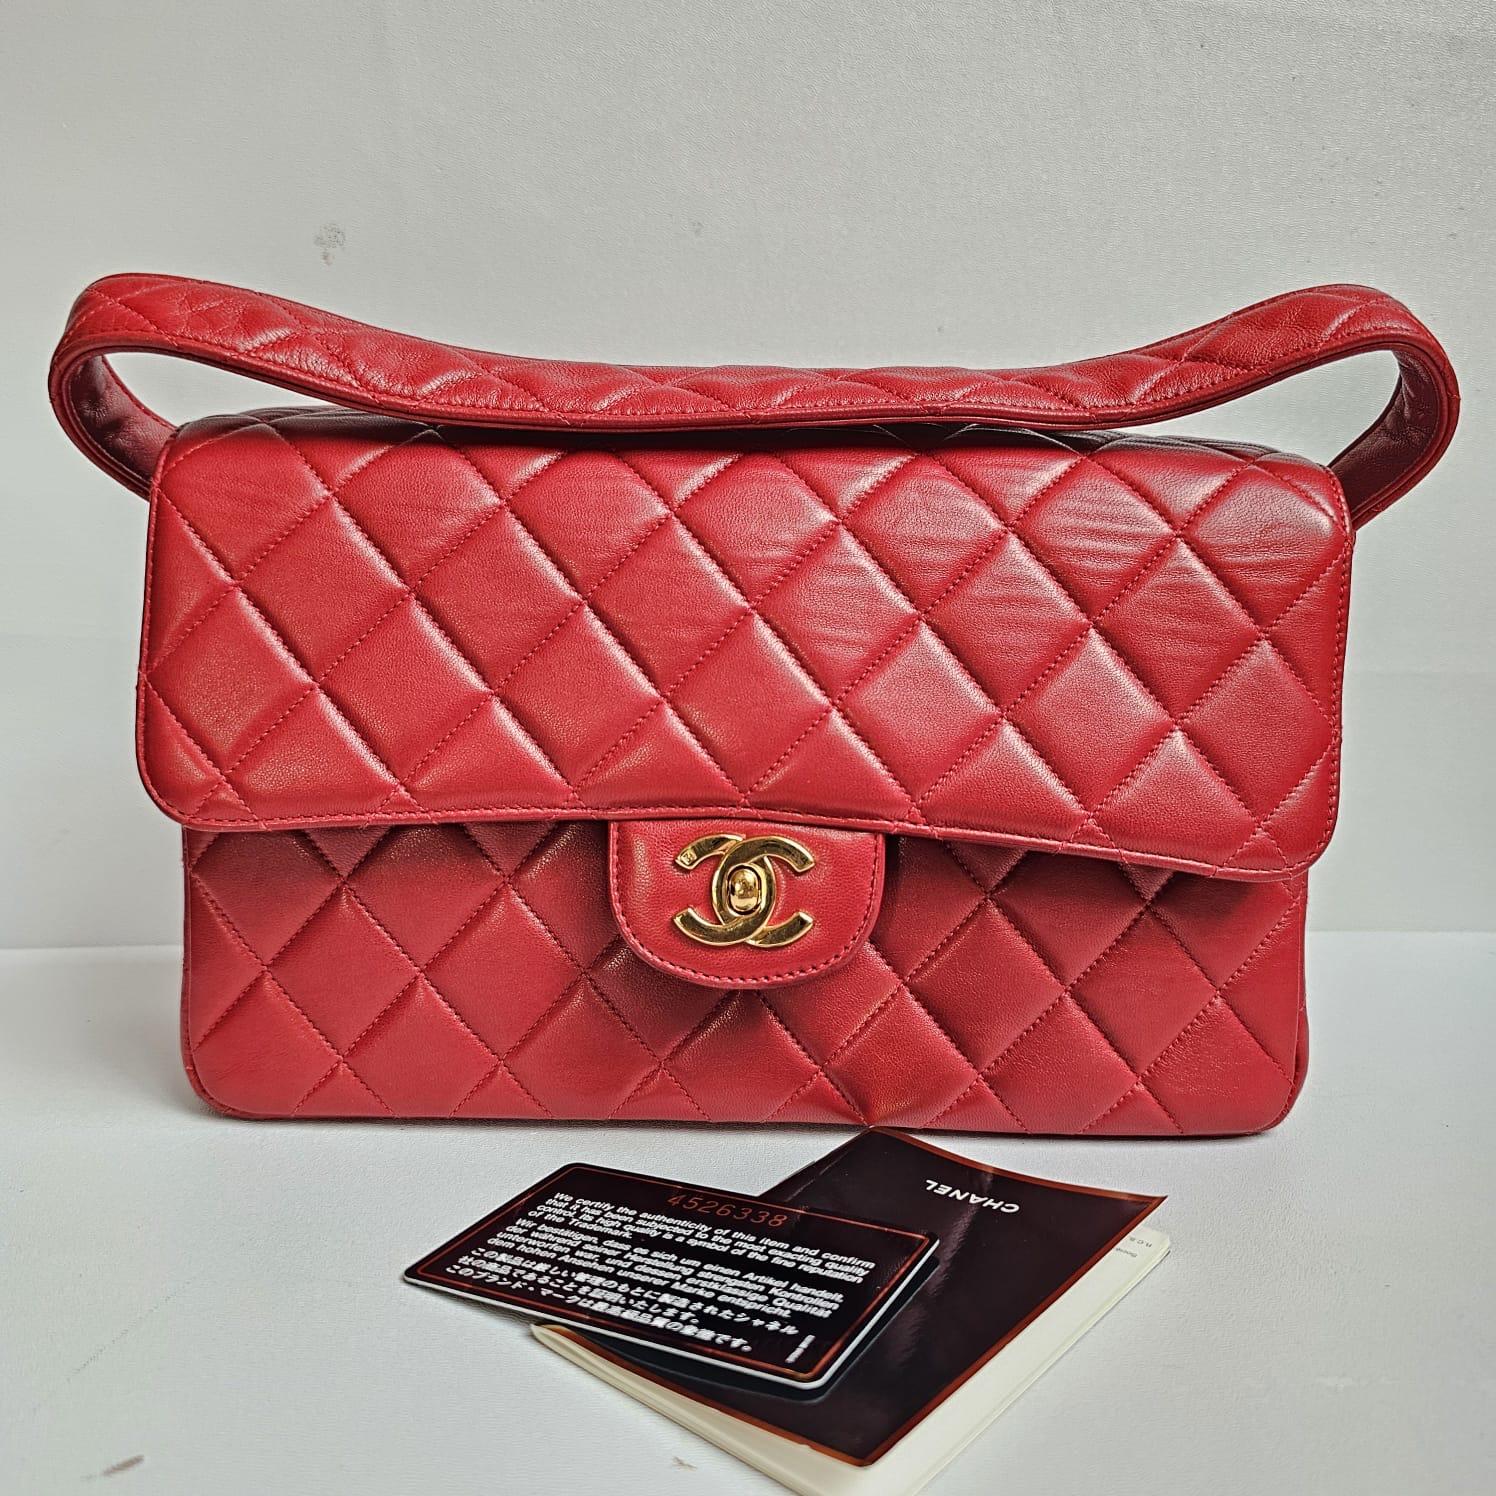 Chanel Vintage Red Lambskin Medium Quilted Double Face Top Handle Bag For Sale 2